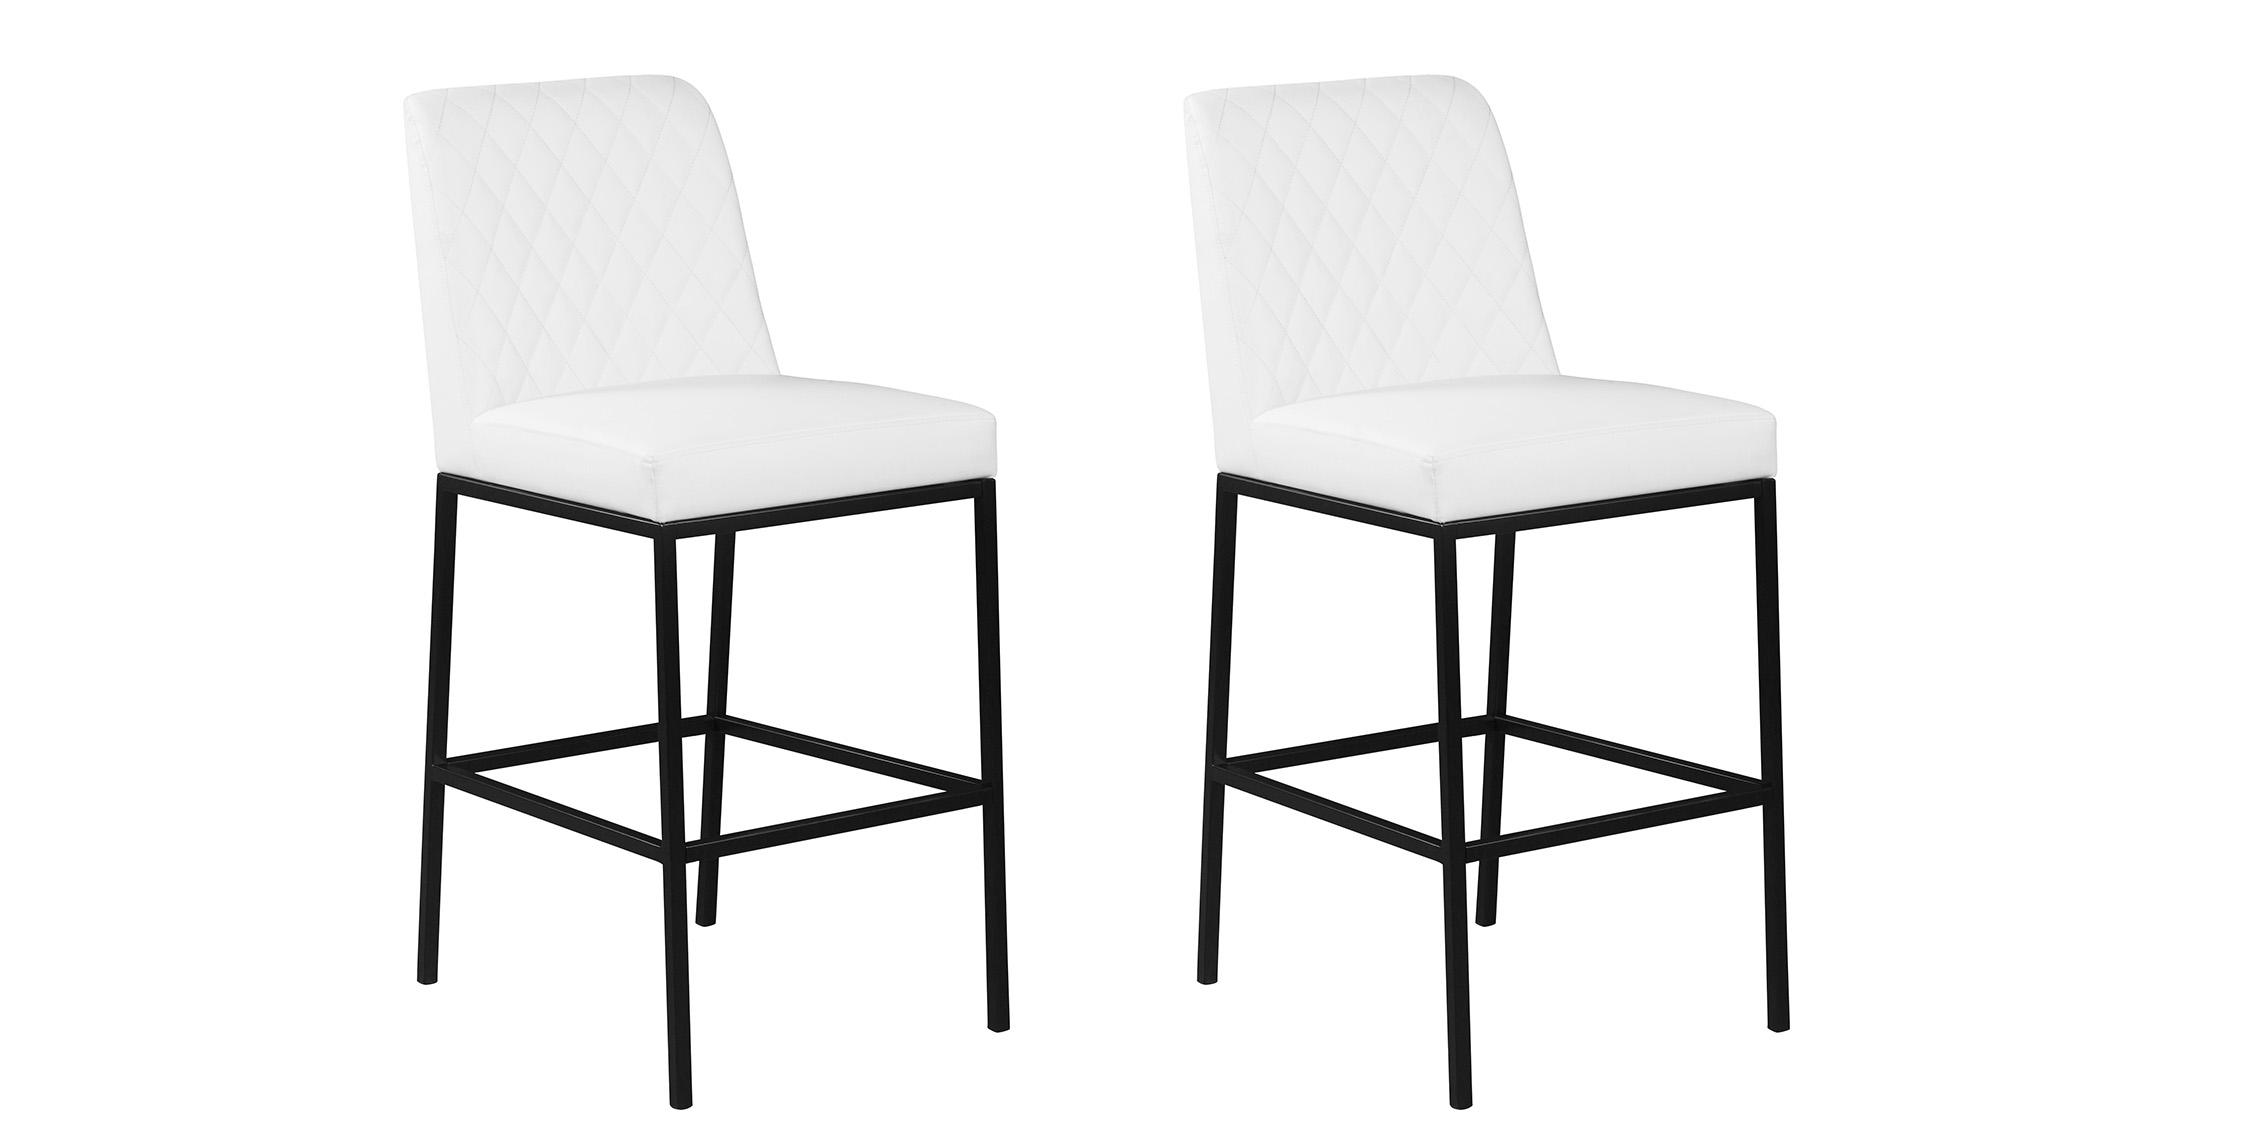 Contemporary, Modern Bar Stool Set BRYCE 919White-C 919White-C-Set-2 in White Faux Leather